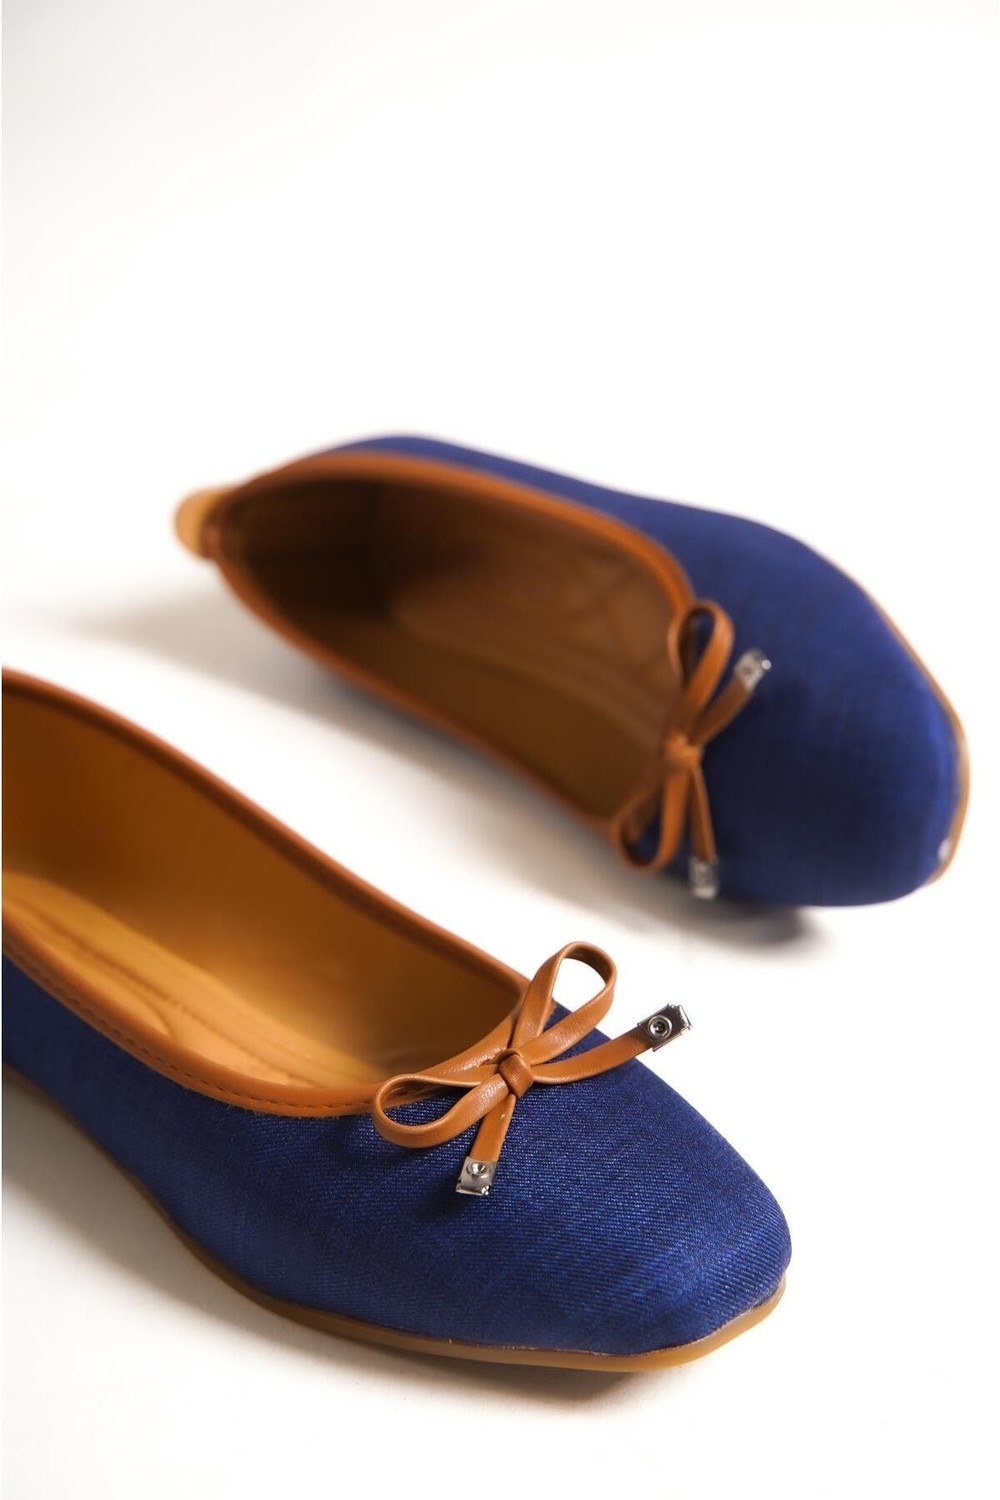 Capone Outfitters Ballerina Flats - Blue - Flat